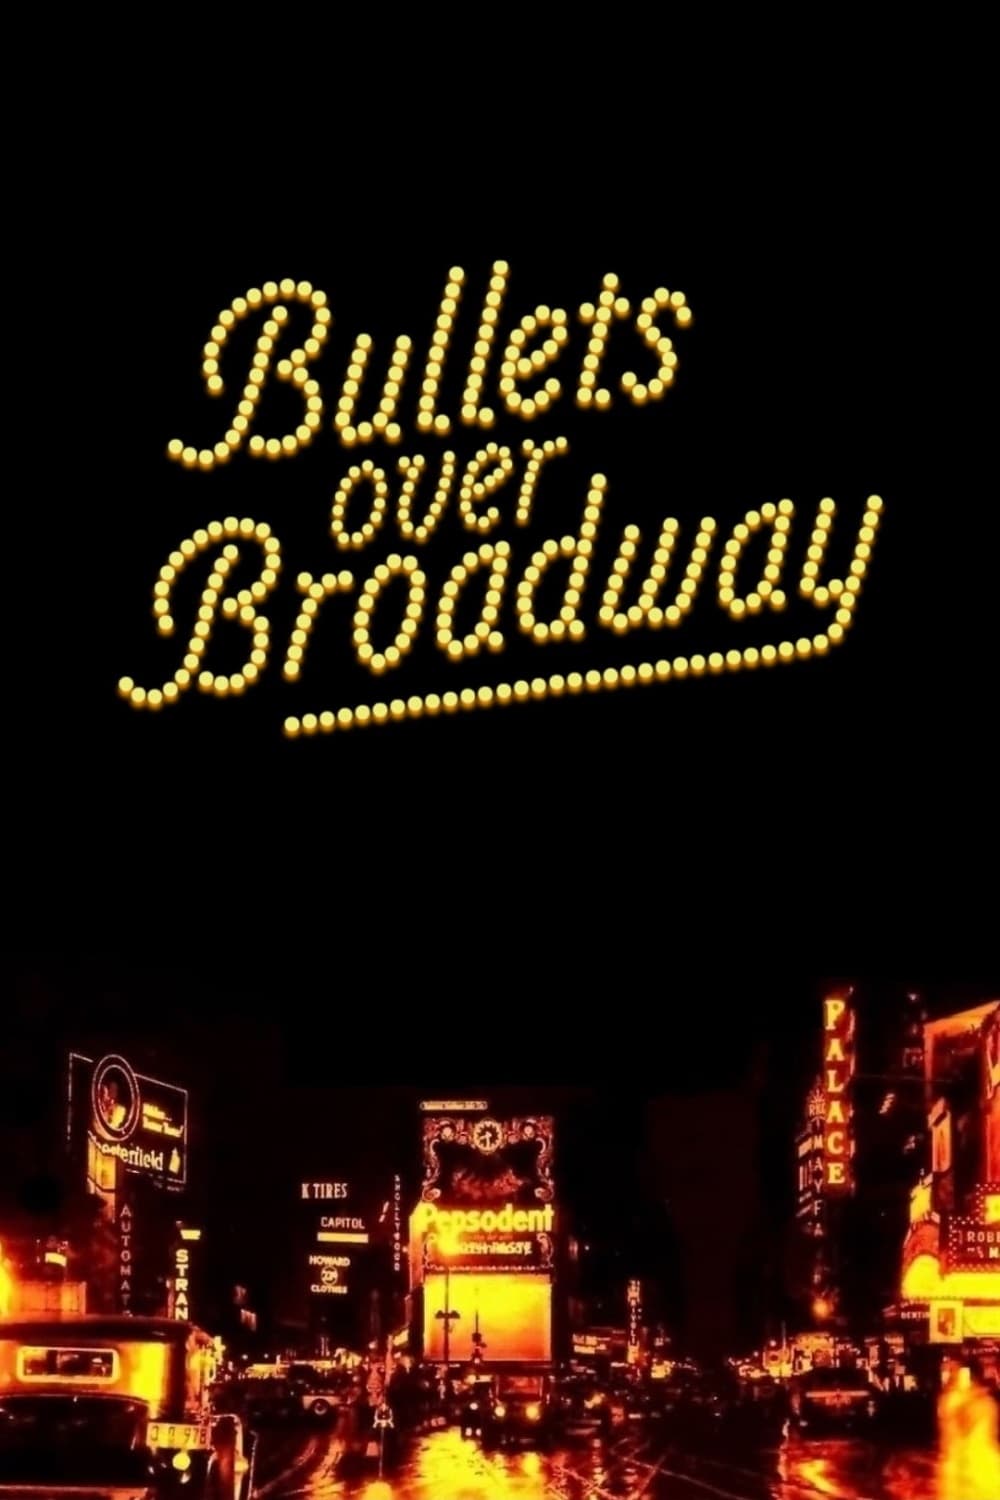 Bullets Over Broadway (1994)